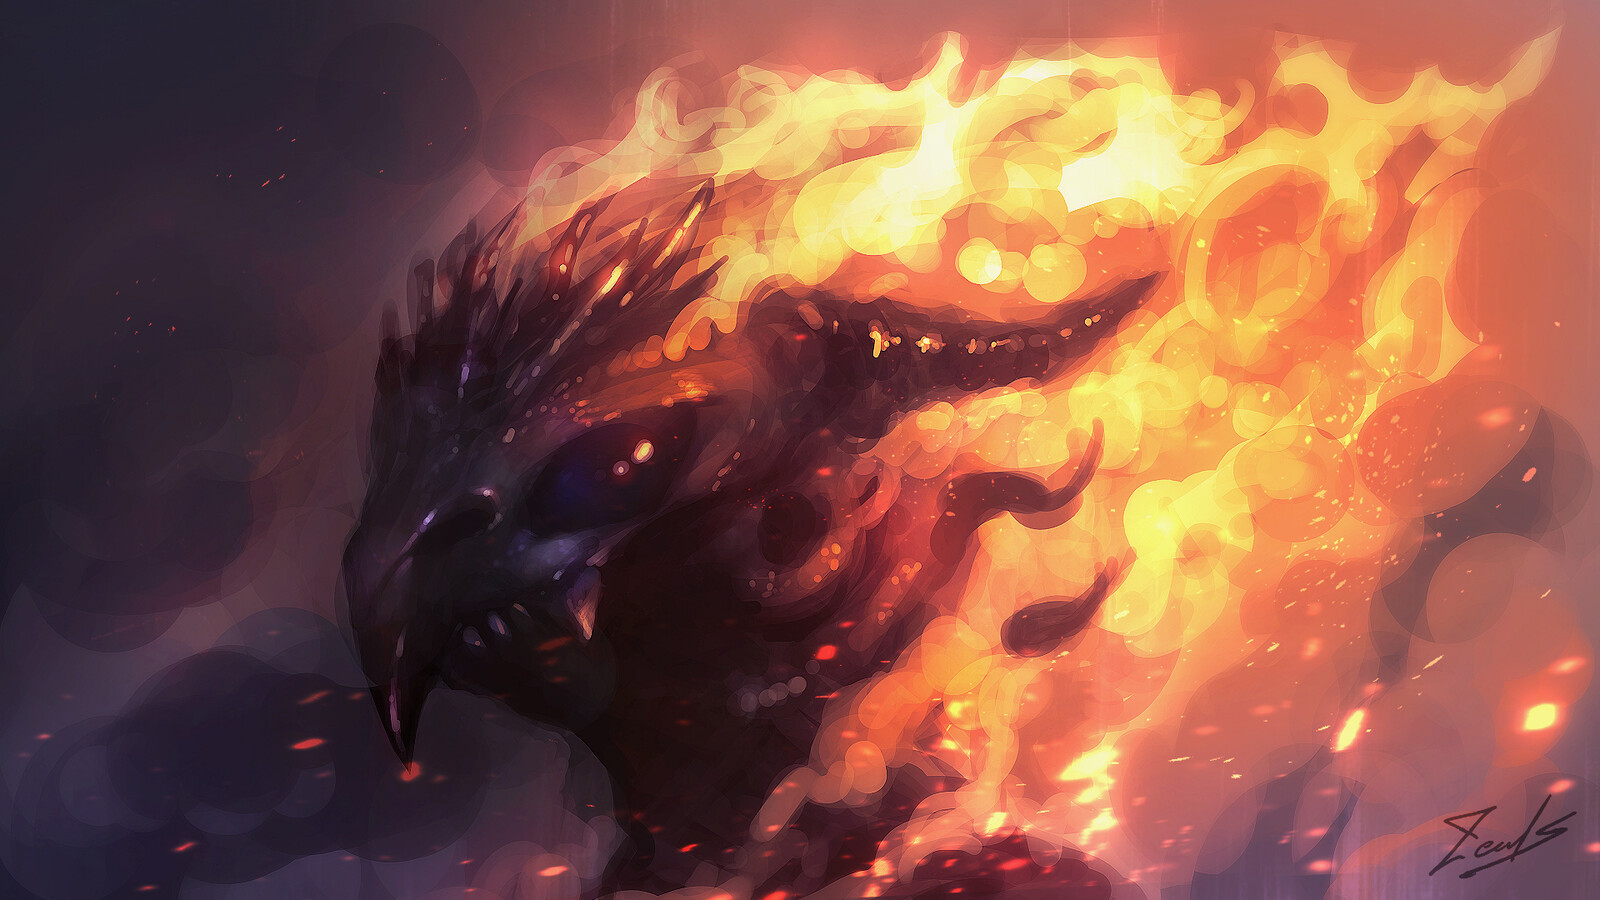 Beast who rise from flames!